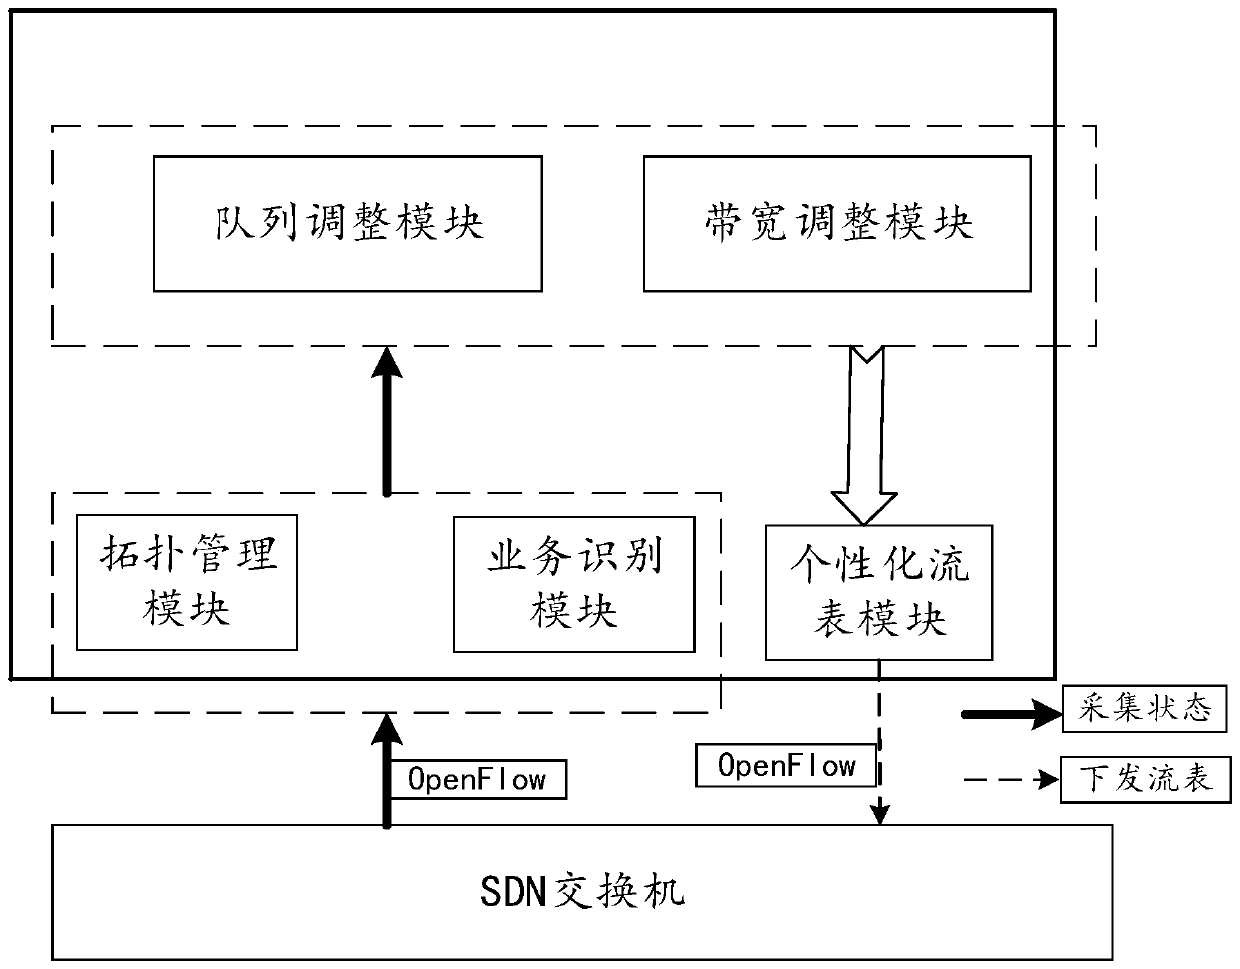 Service quality guarantee system and method based on SDN network